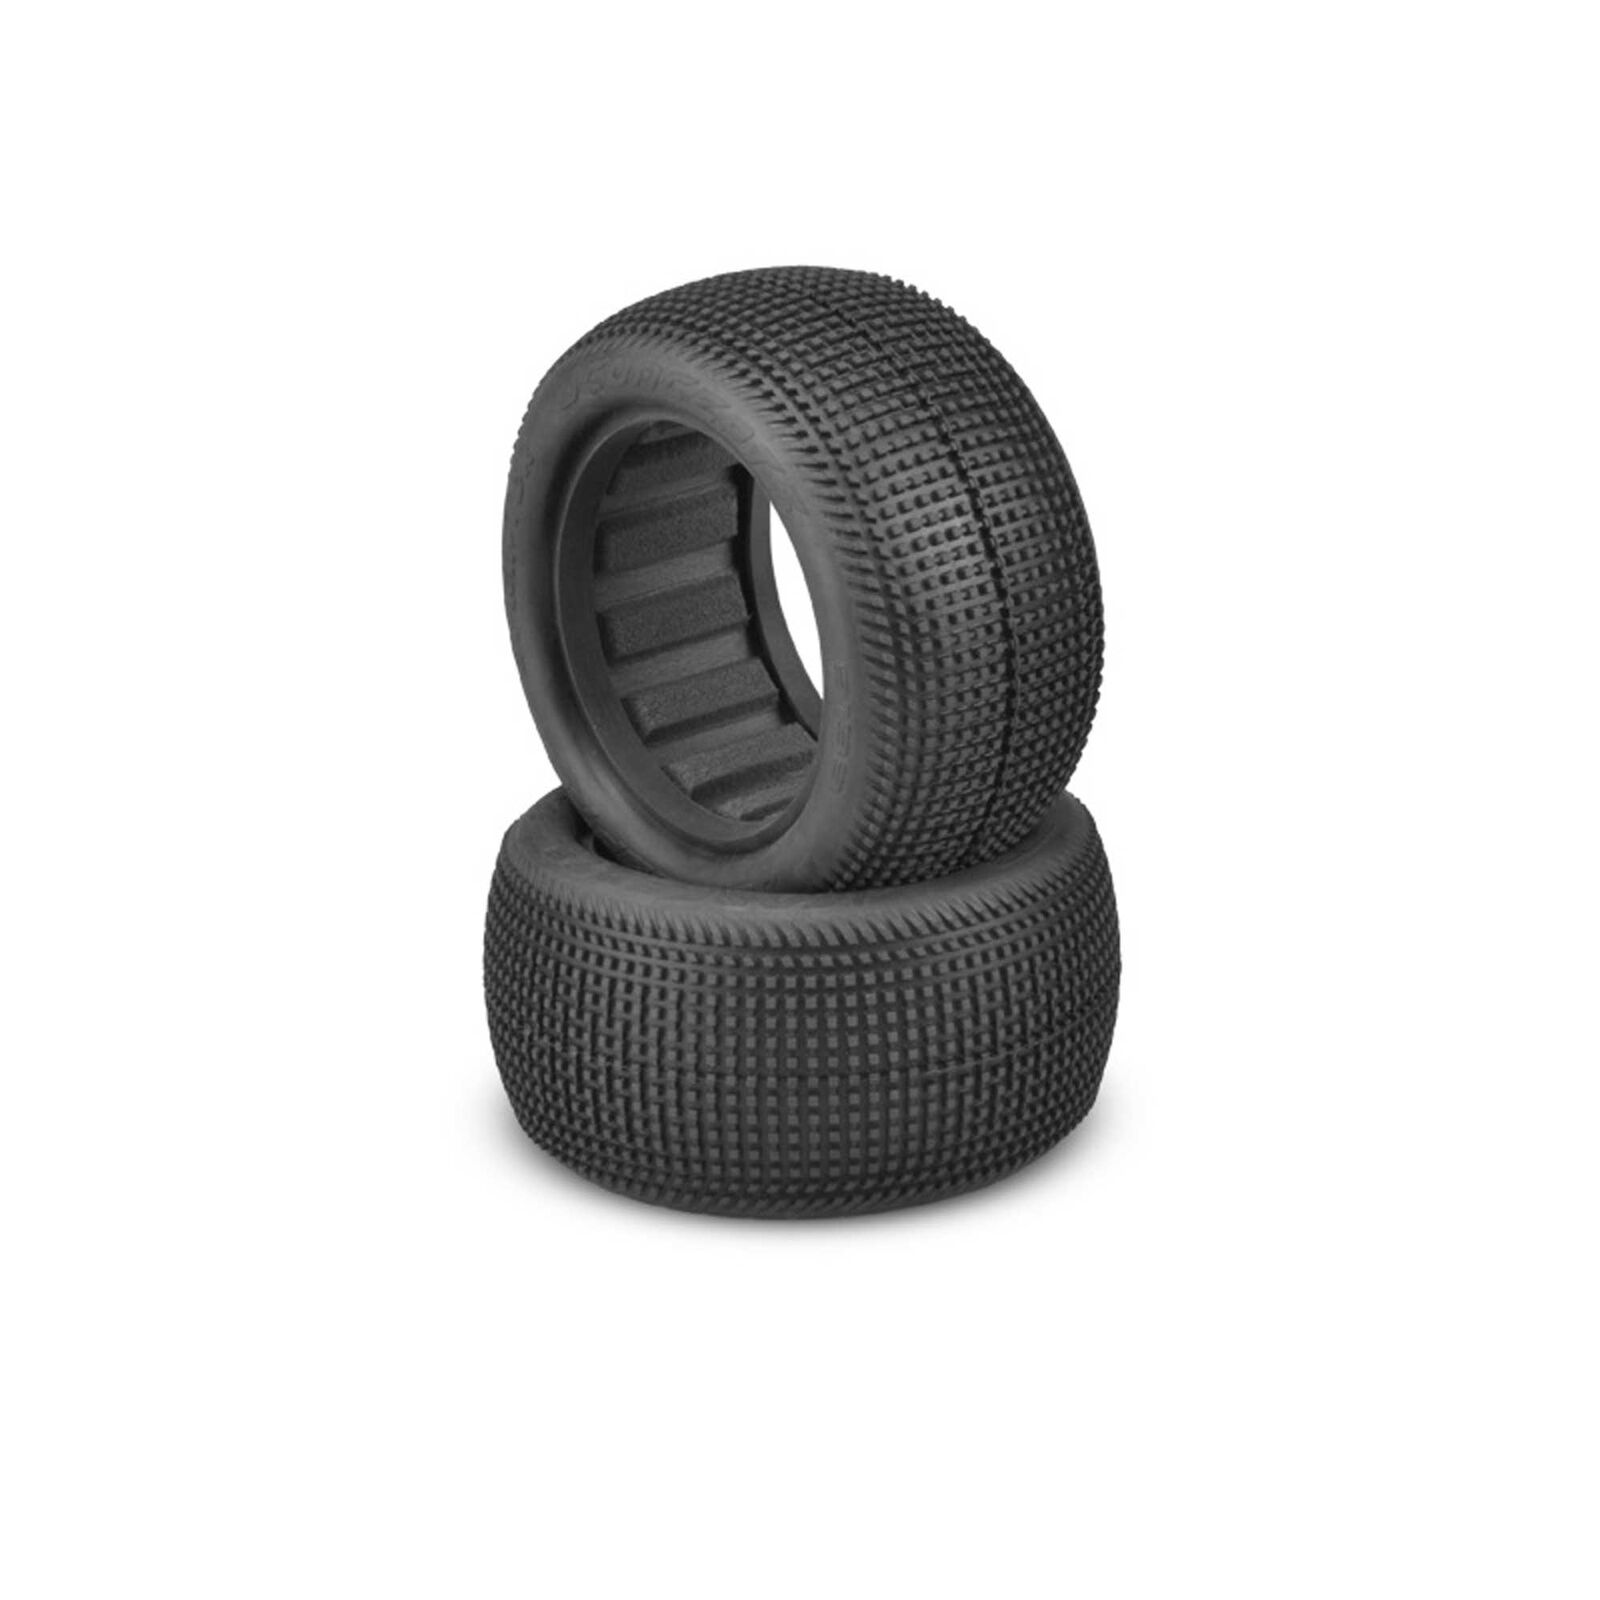 1/10 Sprinter 2.2” Rear Buggy Tires and Inserts, Blue Compound (2)